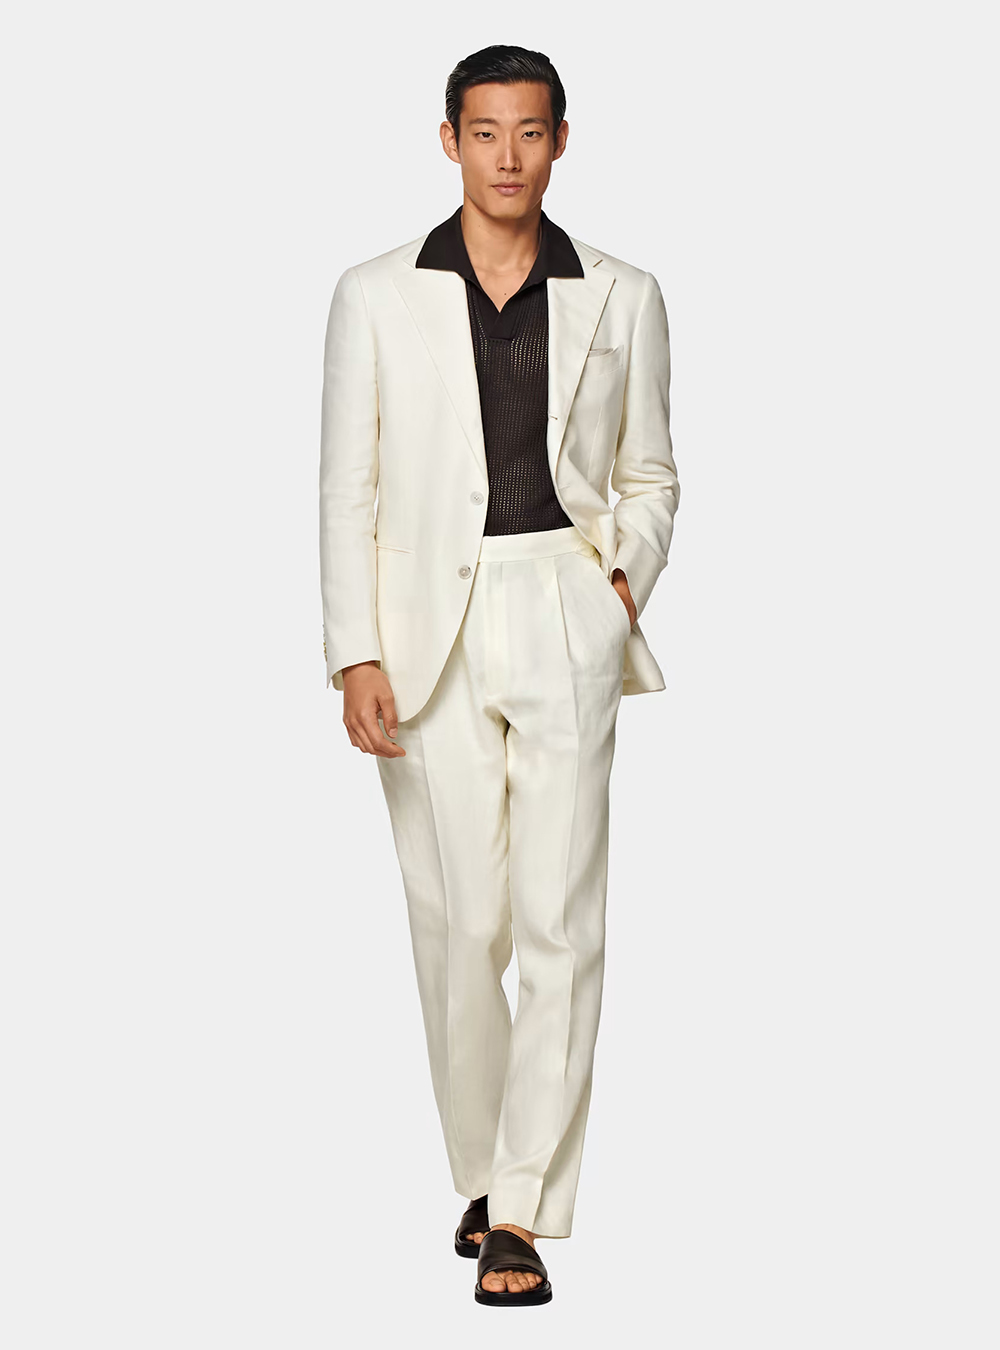 white suit, black polo shirt, and black sliders